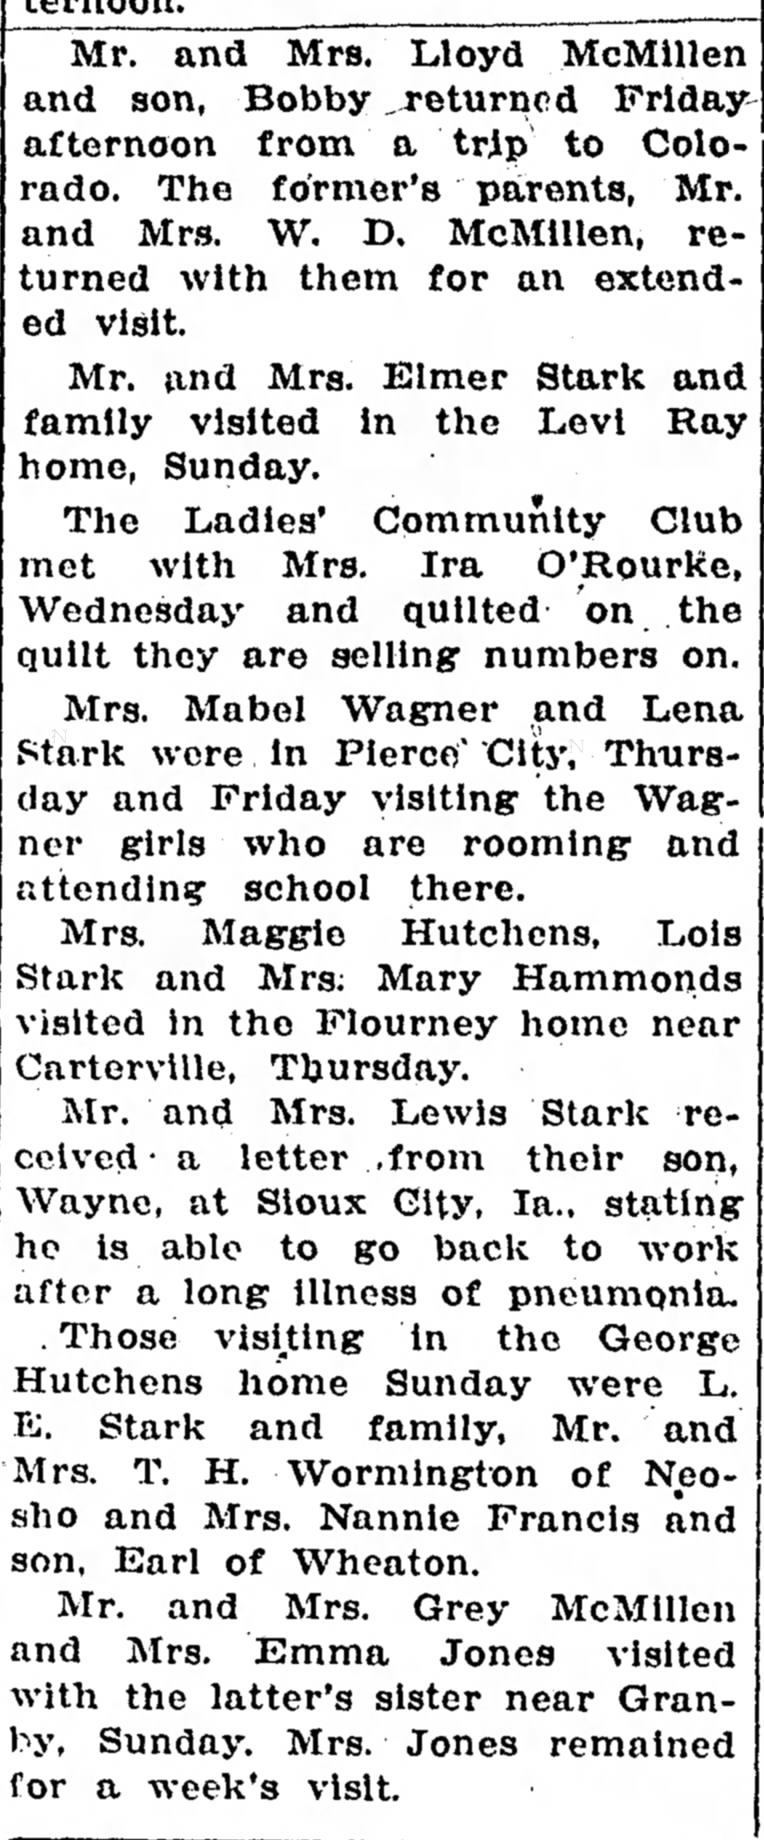 Pioneer news with Stark and McMillen names mentioned. 12 Nov 1932, Neosho, Missouri newspaper.